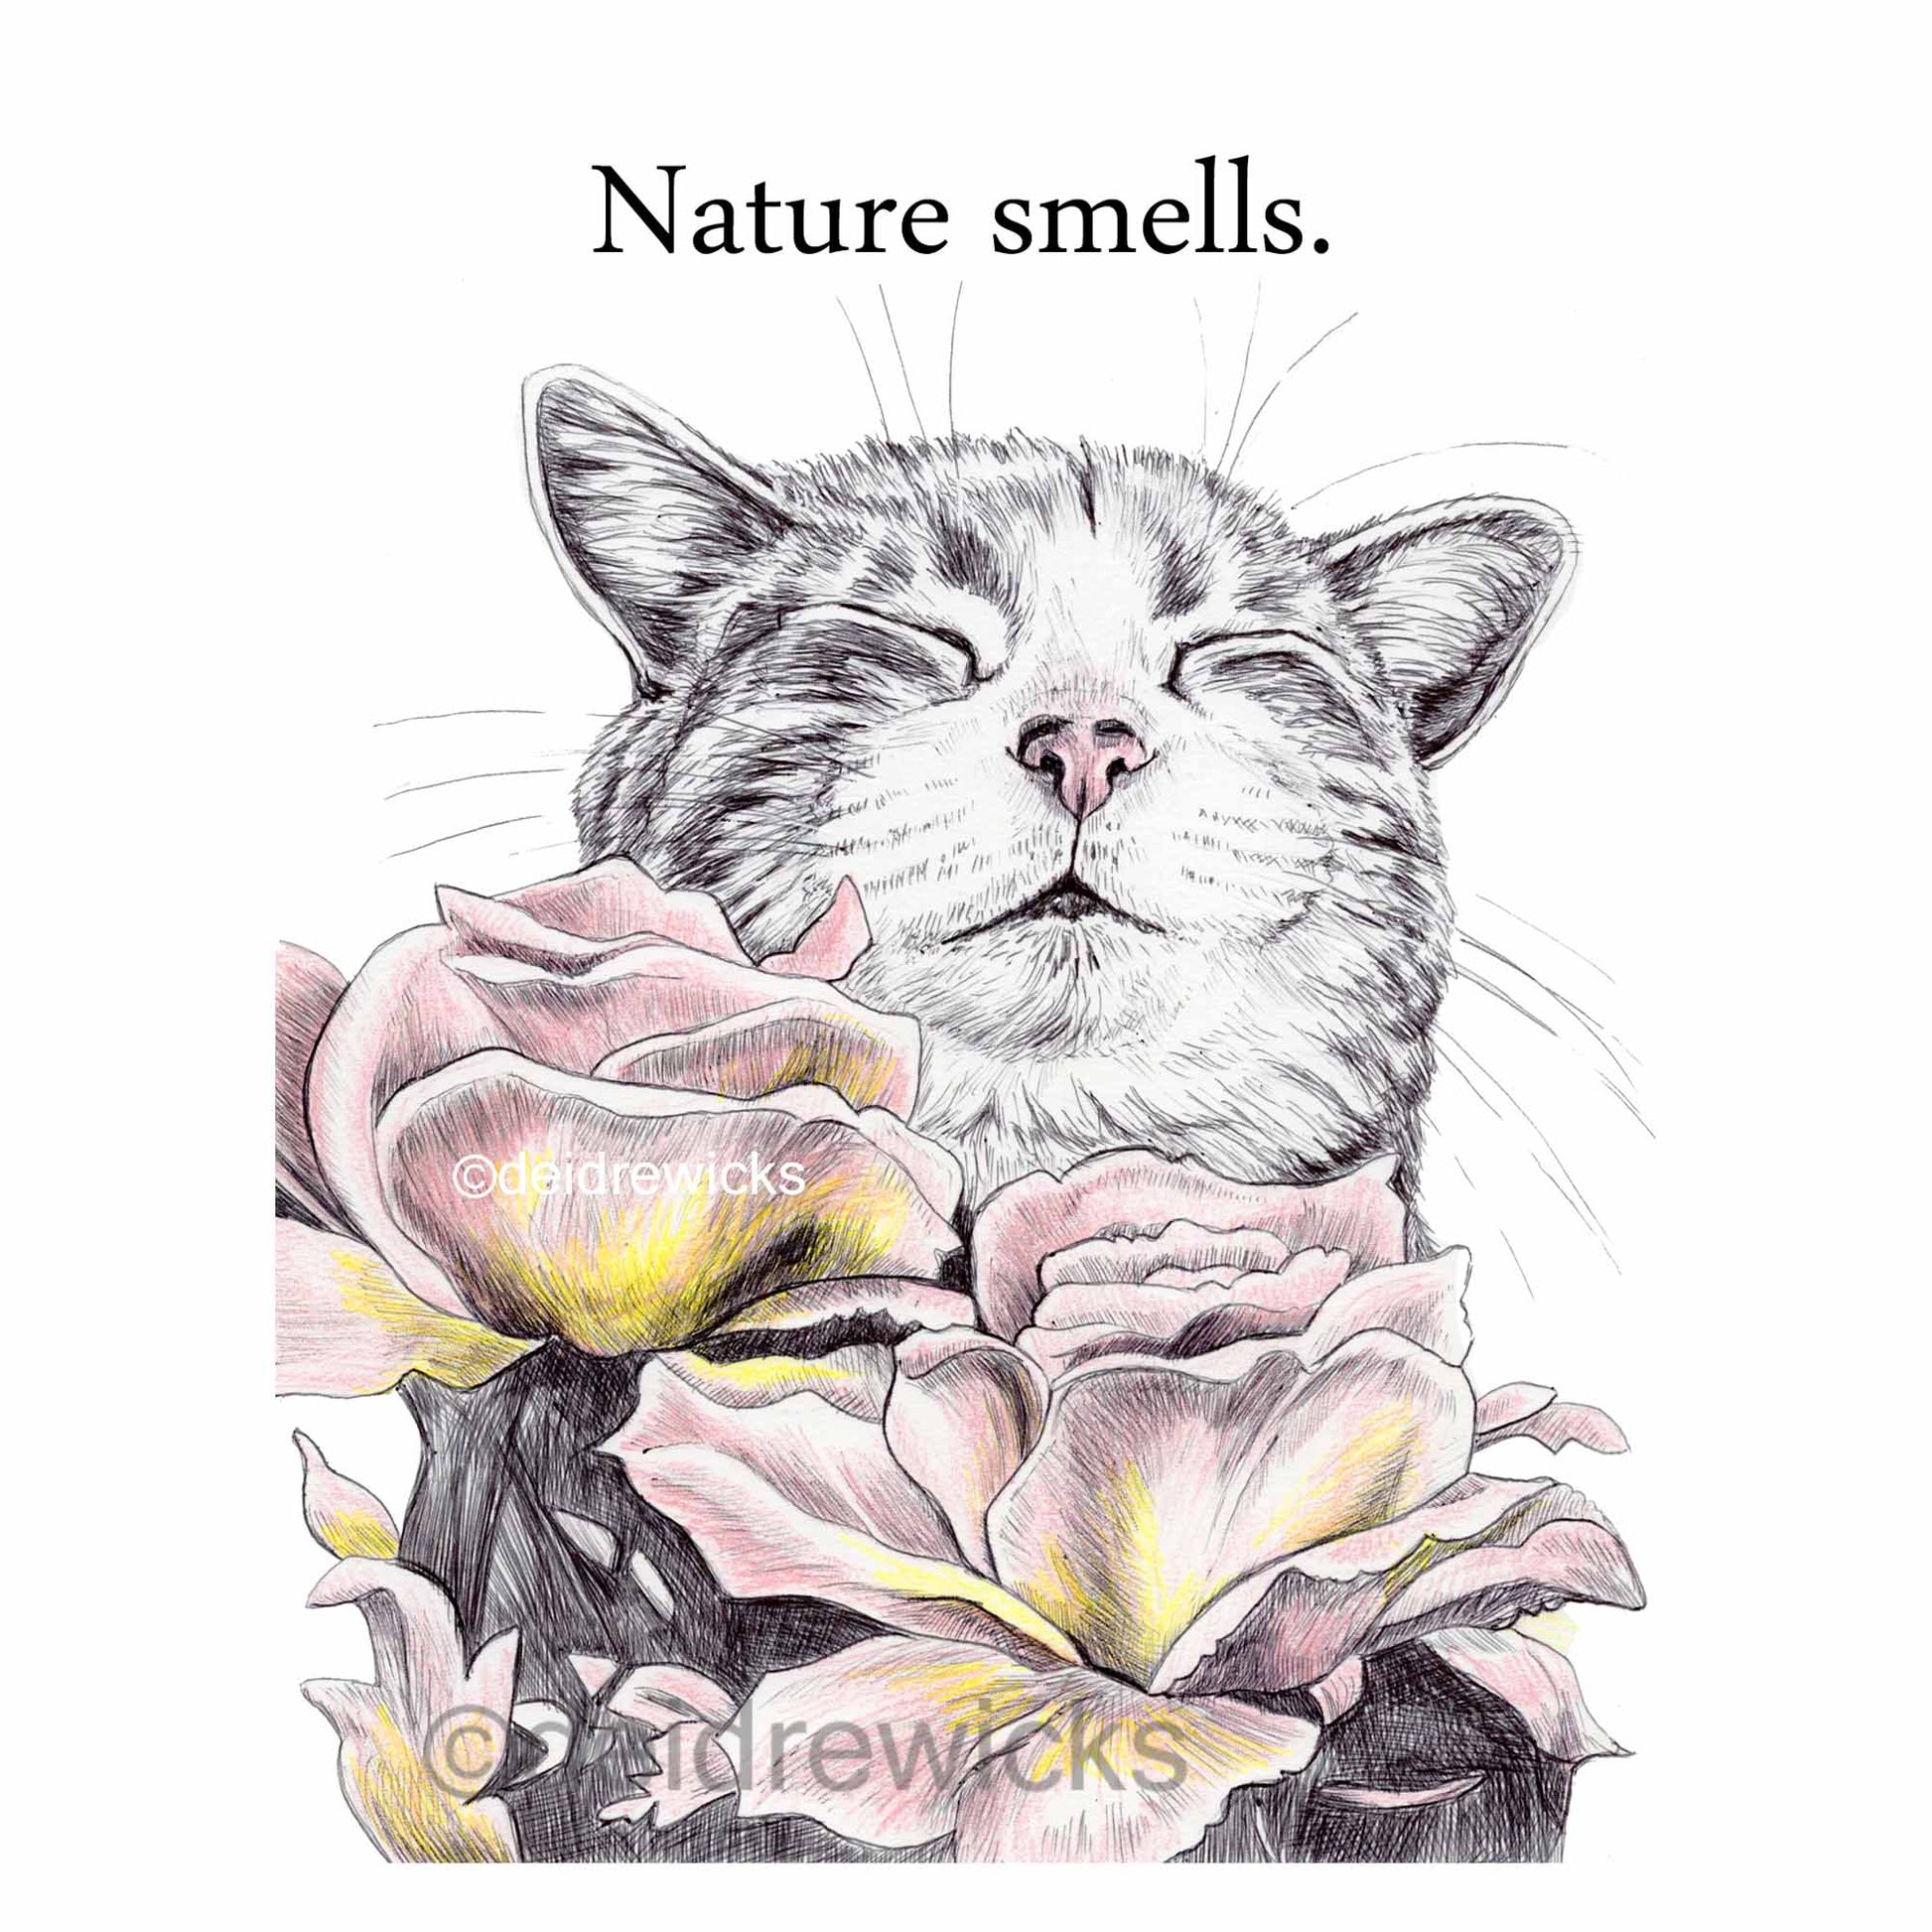 Ballpoint pen drawing of a tabby cat smelling pink and yellow tiffany roses. Art by Deidre Wicks